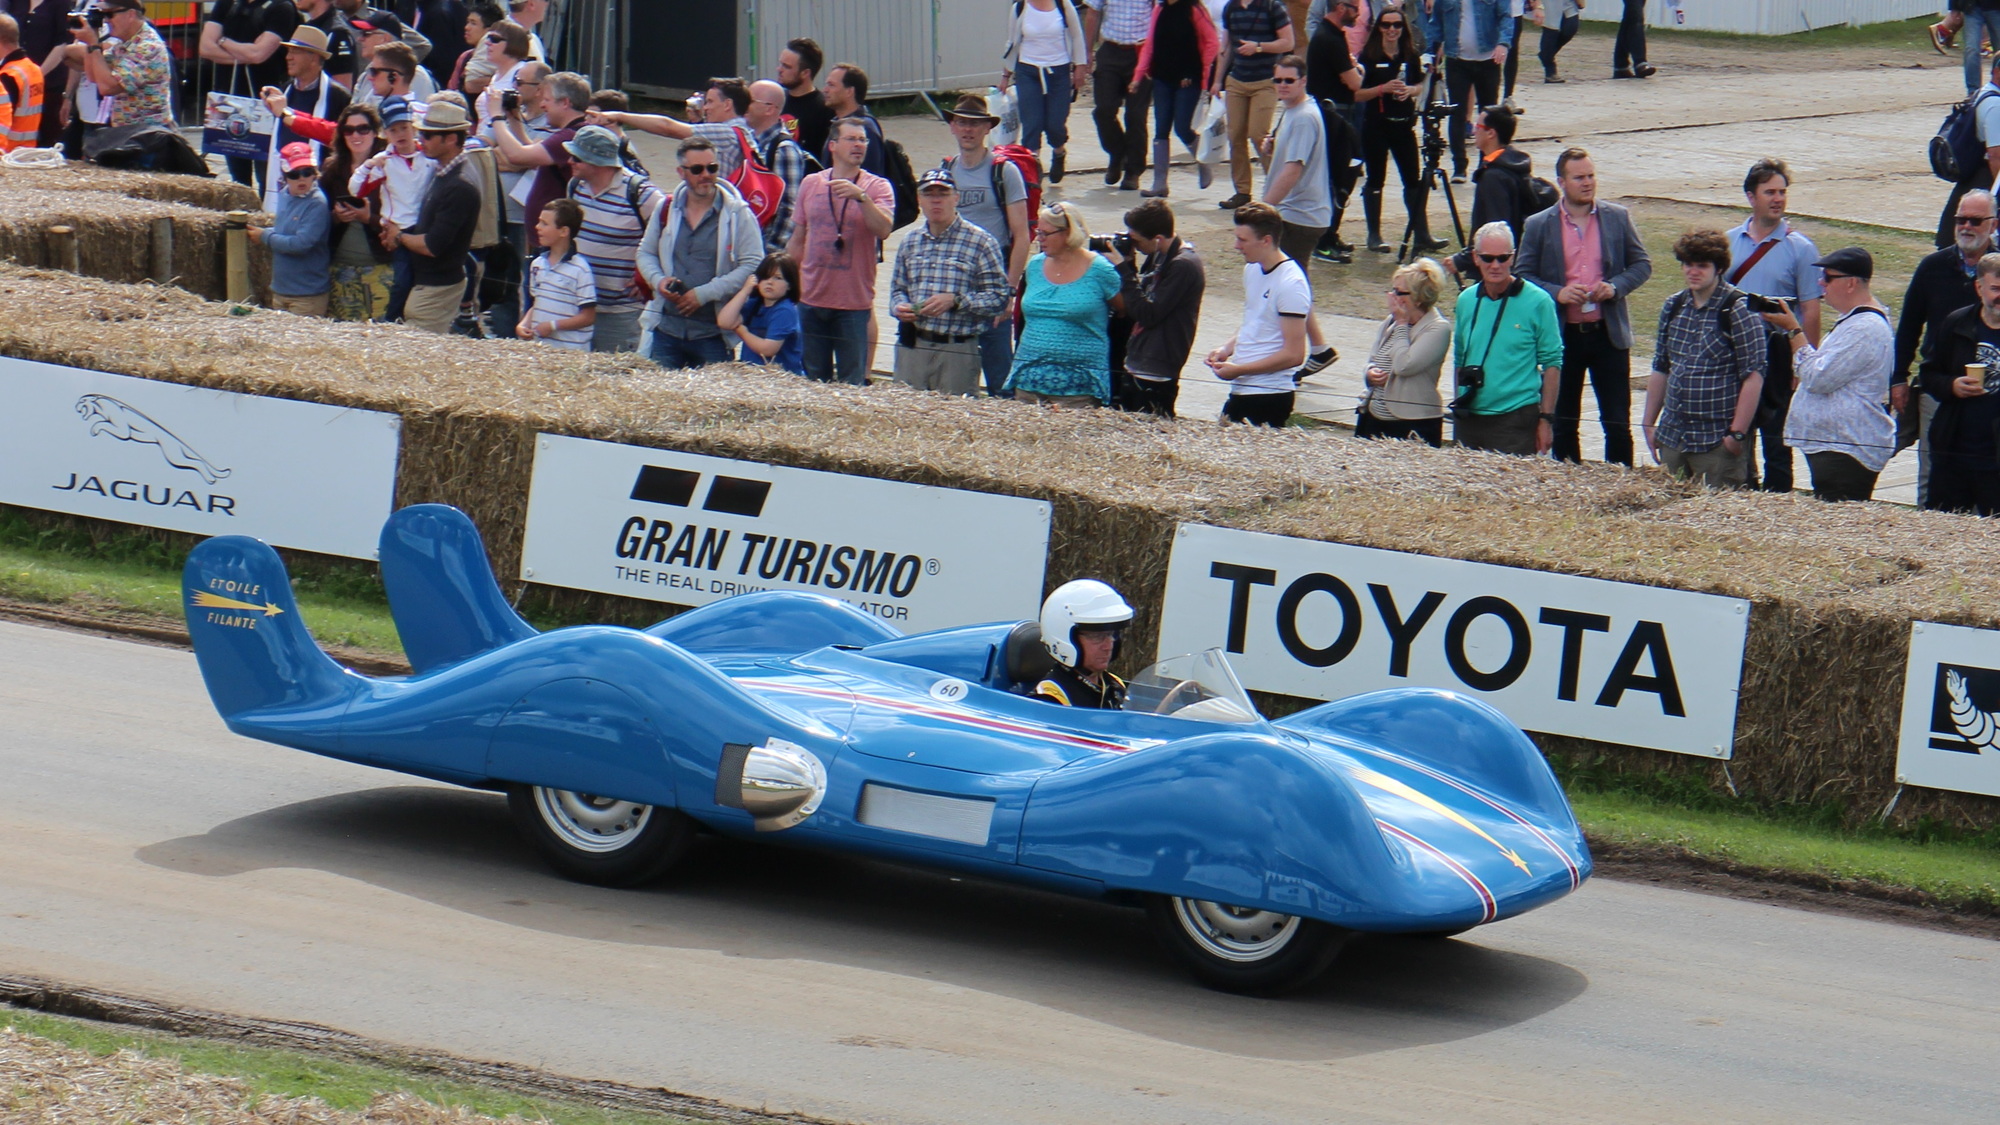 1956 Renault Etroile Filante turbine Land Speed Record contender at 2016 Goodwood Festival of Speed